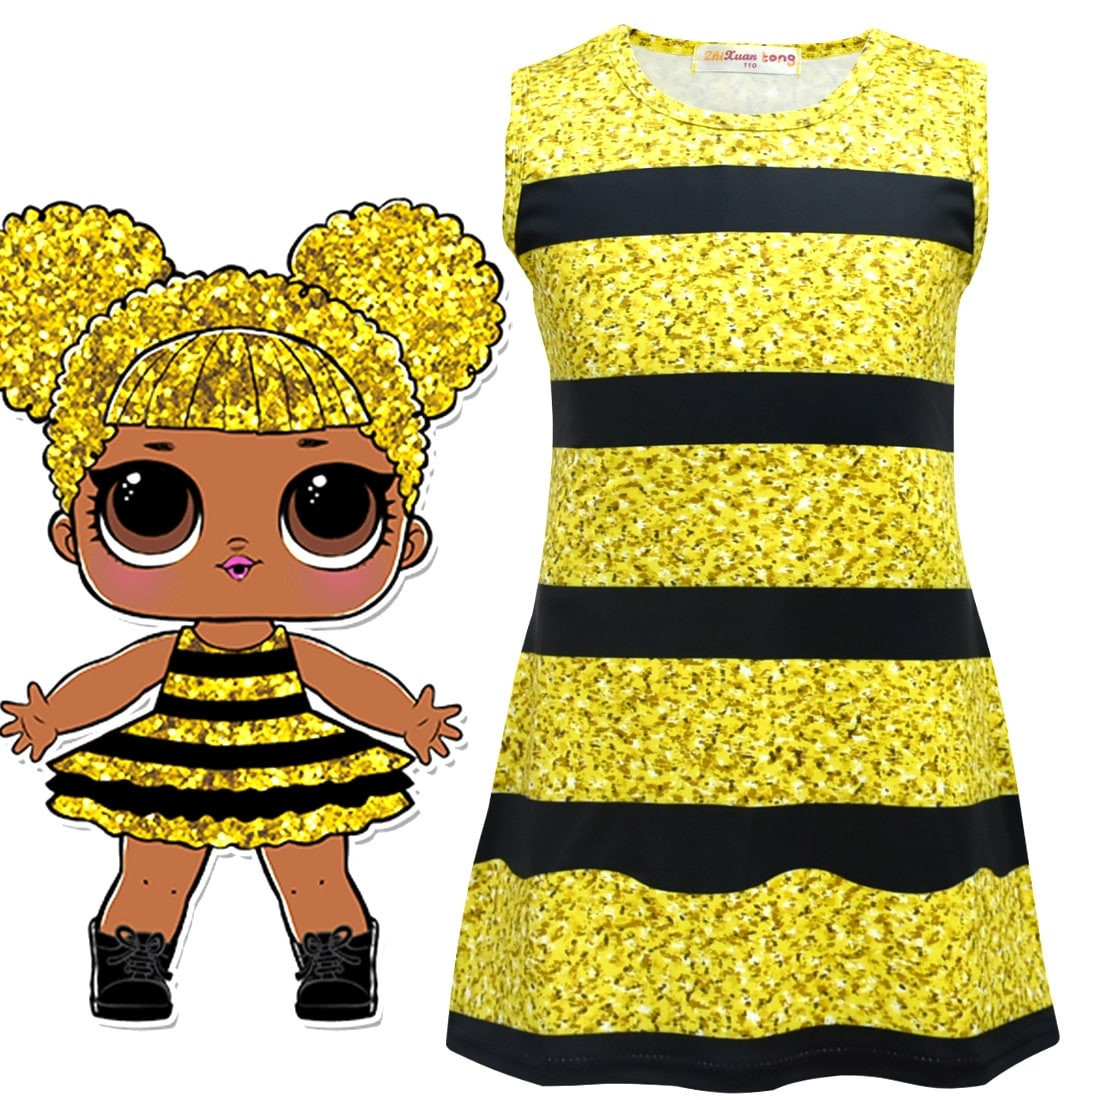 L.O.L. Surprise Queen Bee Doll Costume for Girls